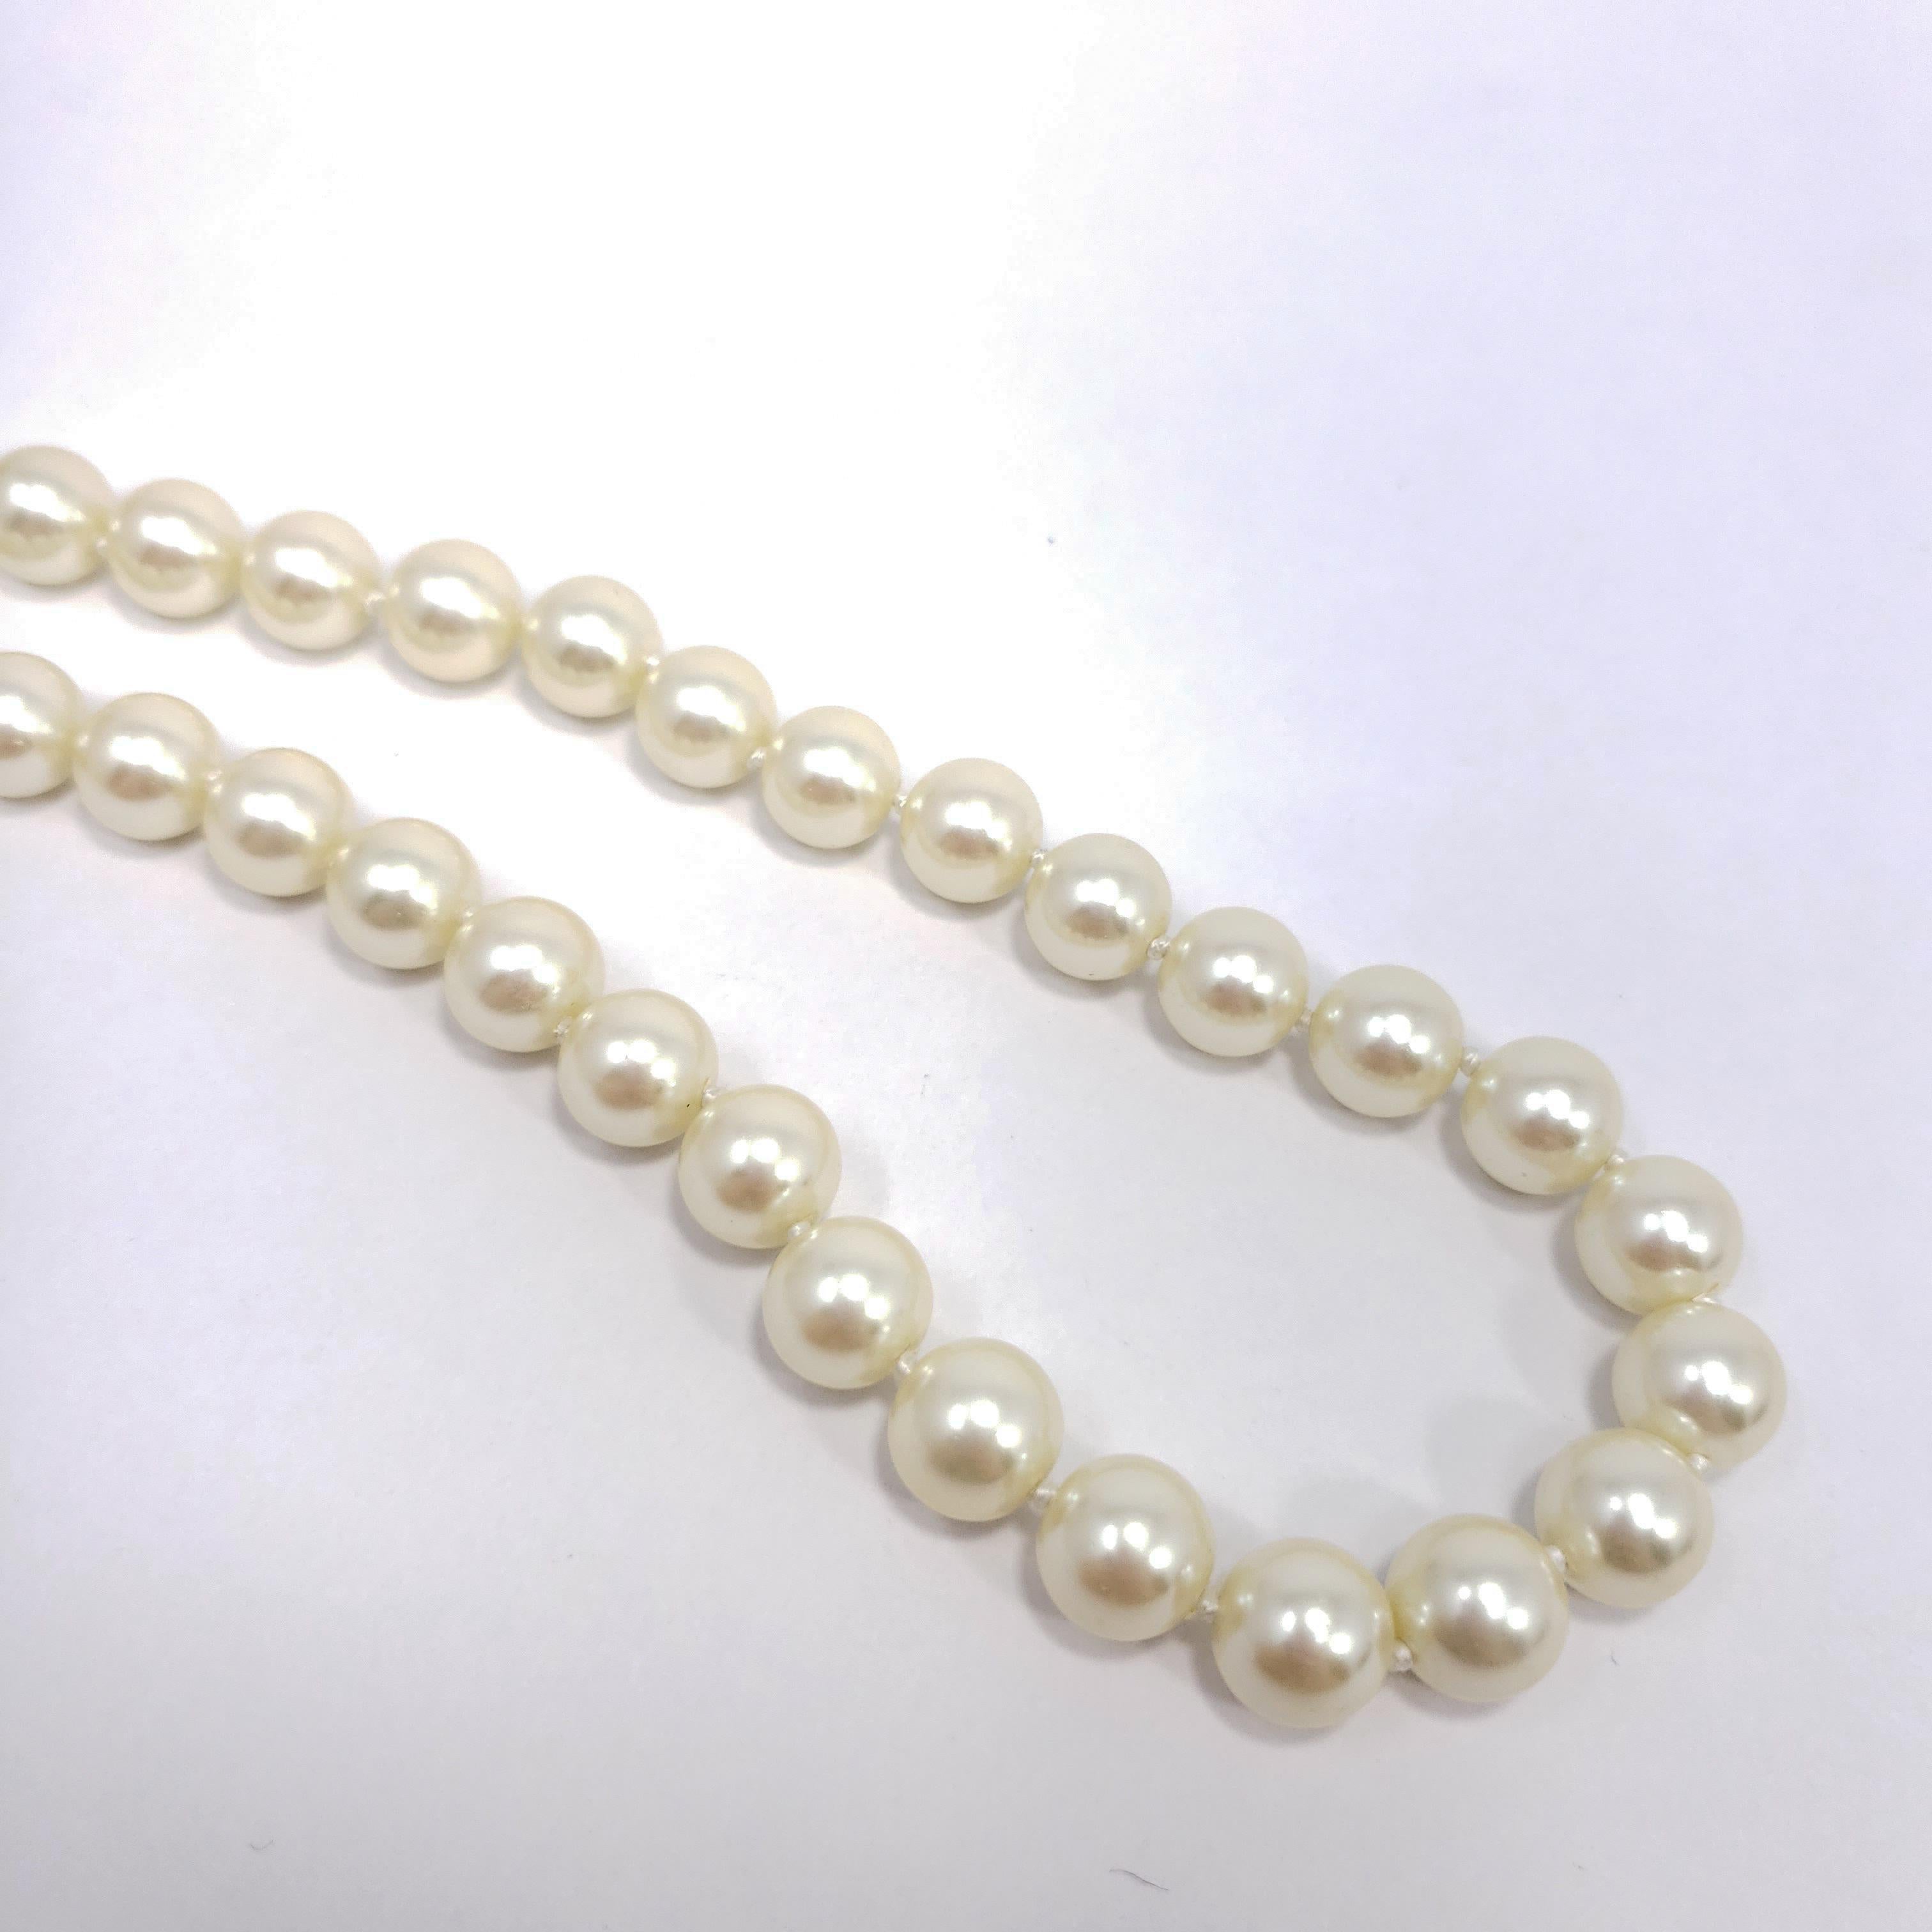 Retro Vintage Faux Pearl Necklace, Gold Accents, Mid 1900s, 22 Inches For Sale